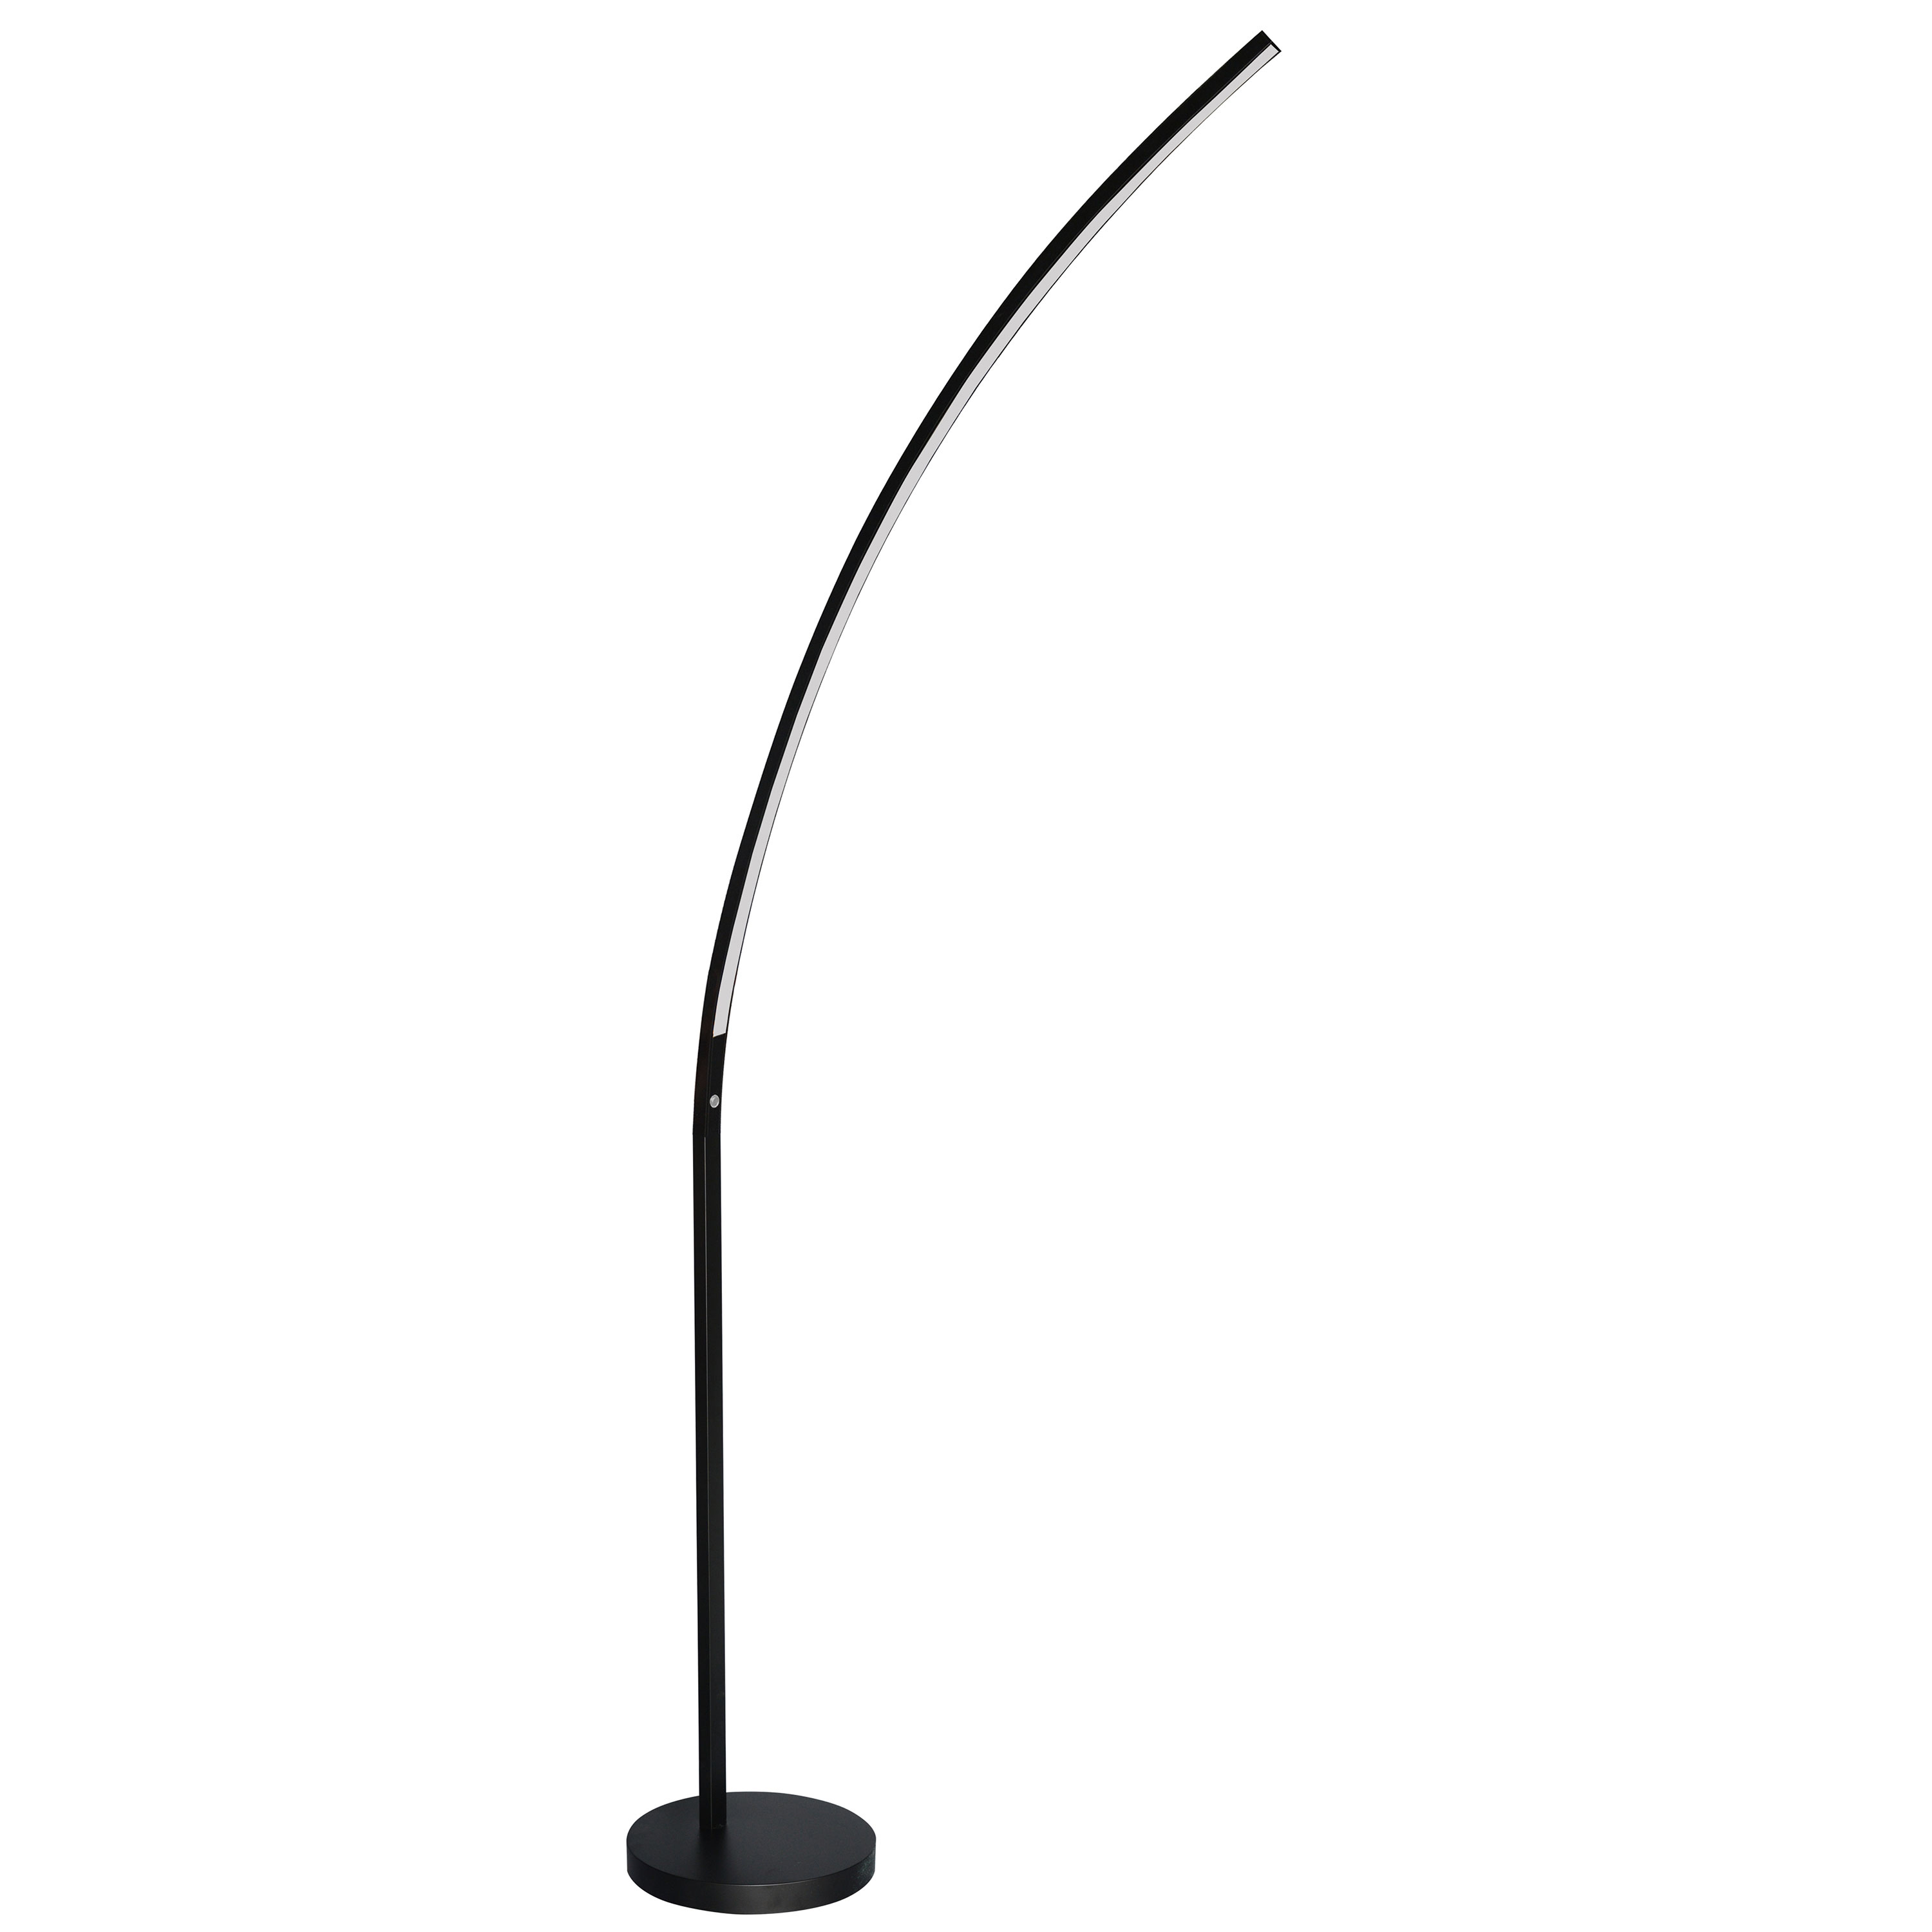 Clean lines and appealing curves draw attention to the Gentle Bend family of lighting. The design features an integrated LED light. LED fixtures produce light at up to 90 percent better efficiency than incandescent lighting. The rod extends upwards from a metal base, incorporating a slight bend that begins halfway up the construction. The LED light, set inside the curve, can be placed to provide welcome illumination over a specific area. Form and function blend together in a seamless design for your modern living room, bedroom or office space.